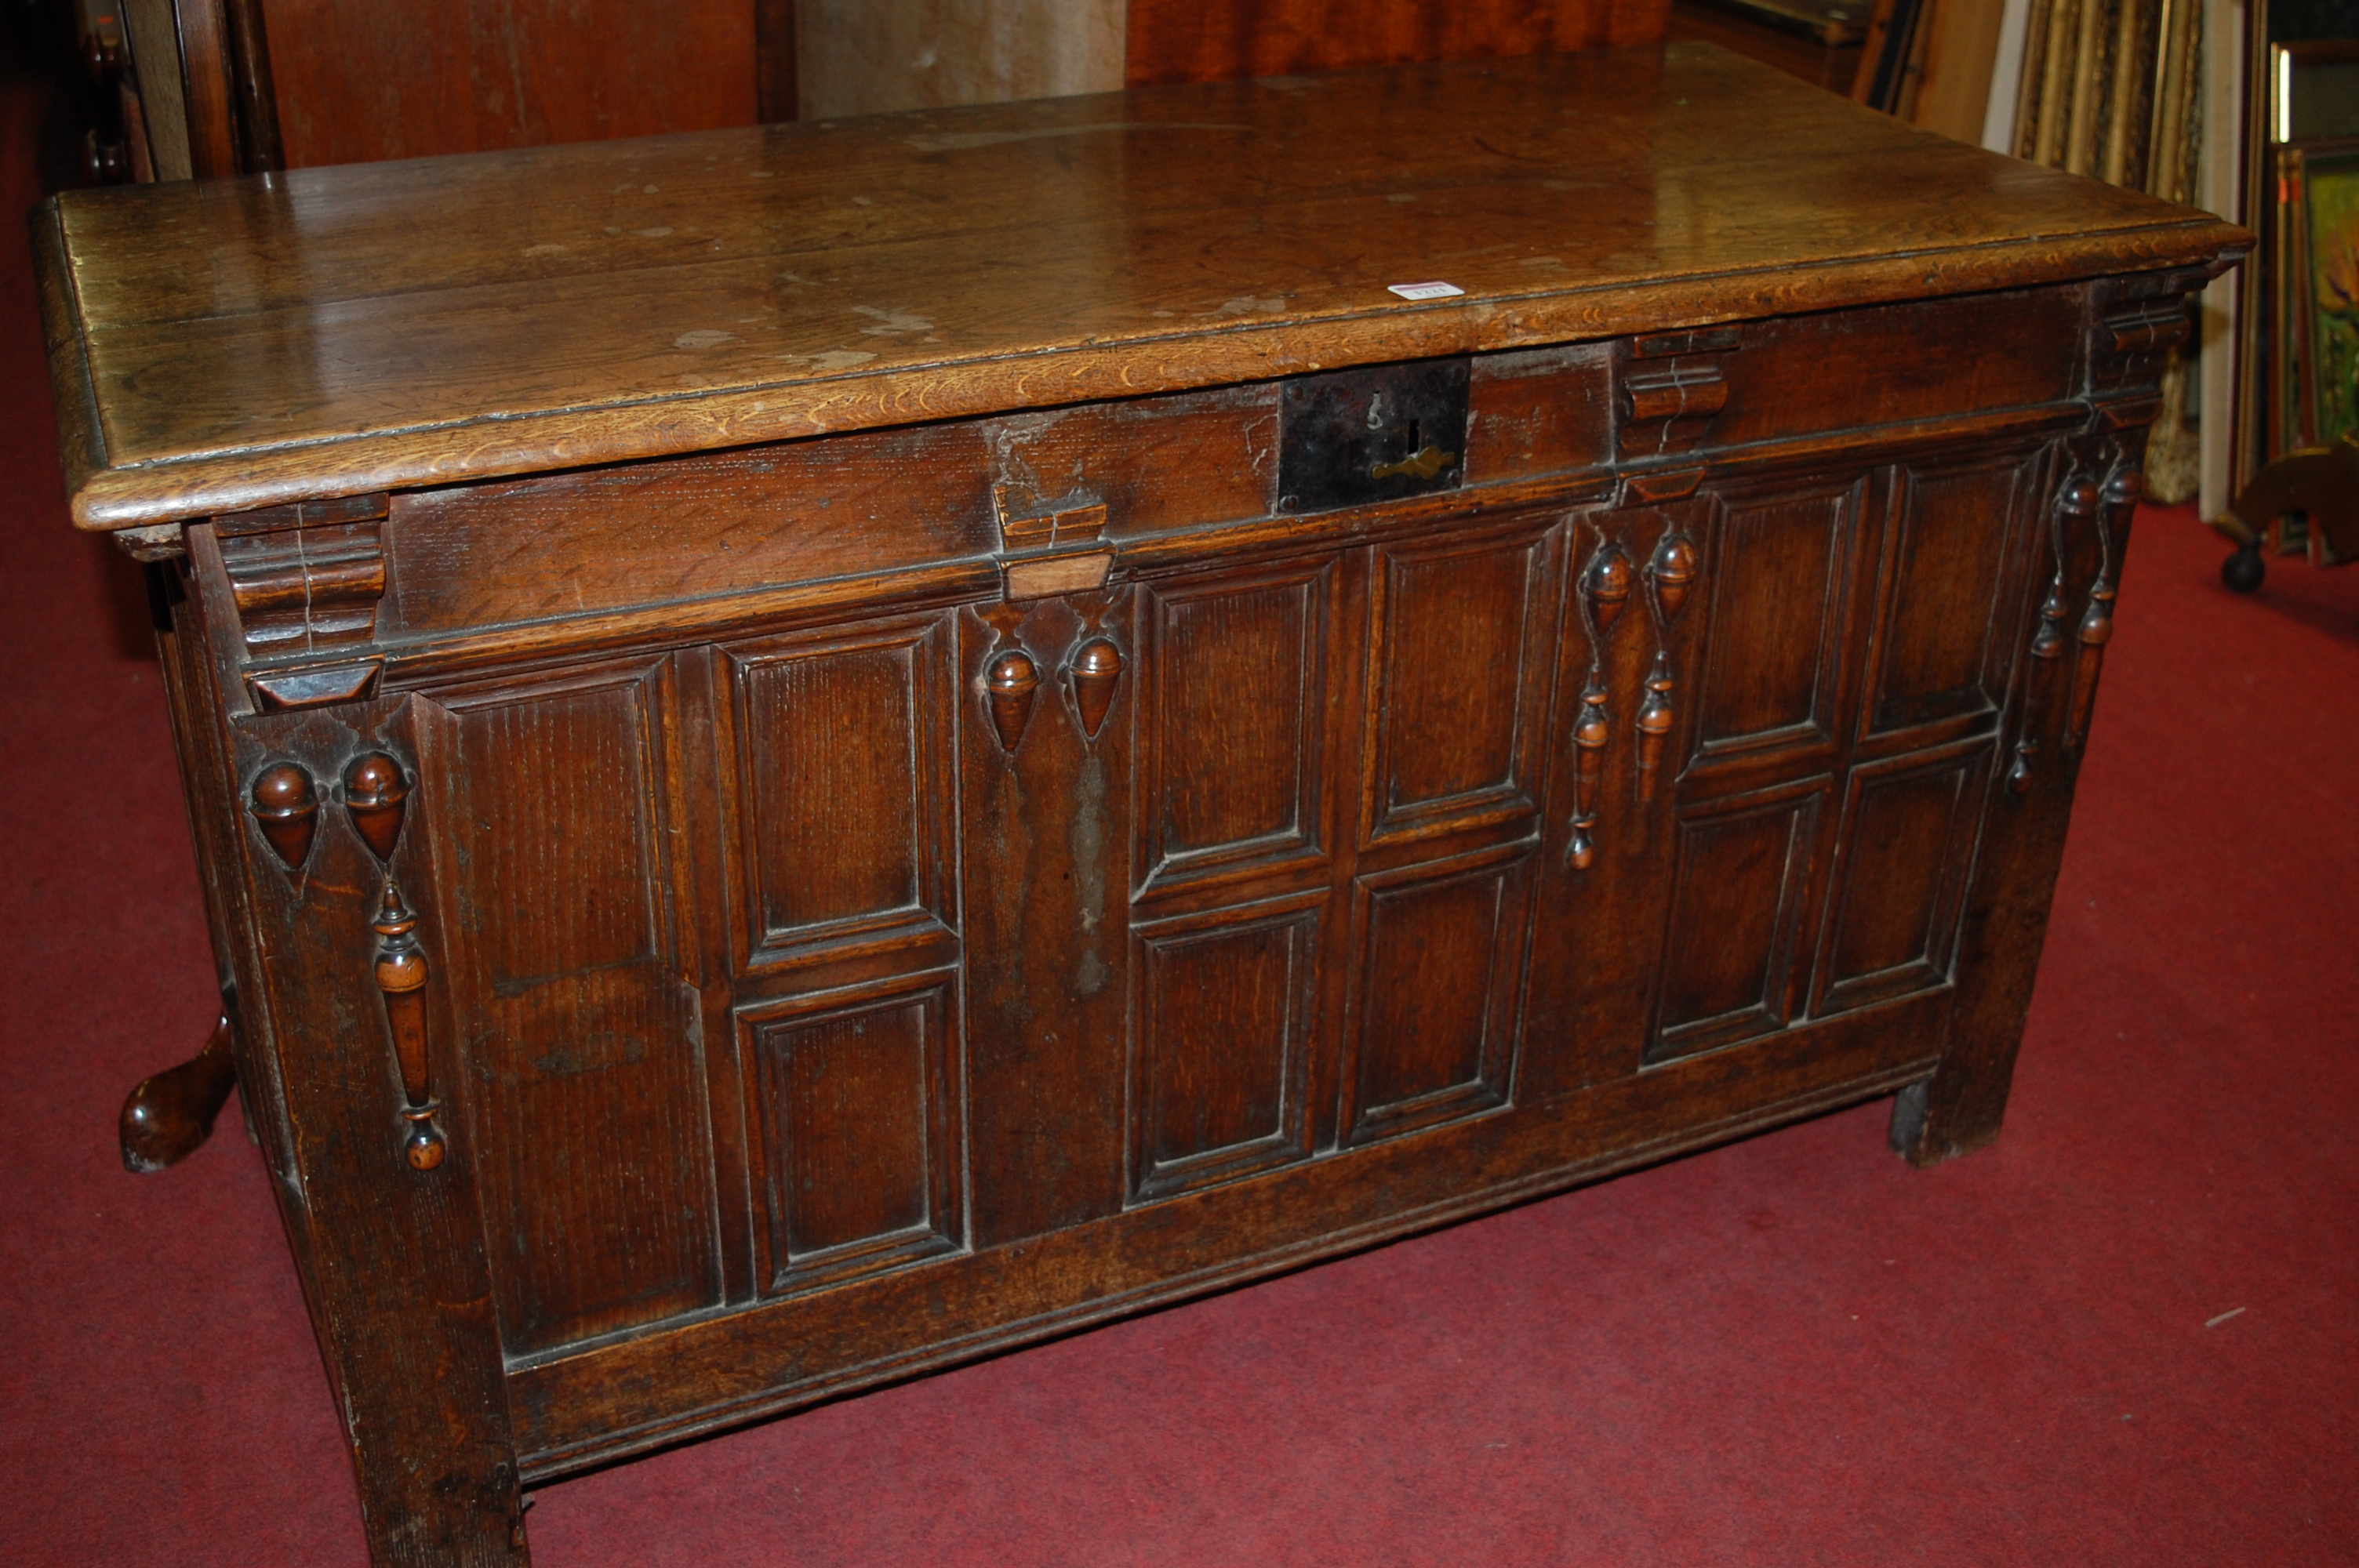 An early 18th century joined oak coffer, having a two-plank top on replacement ironstrap hinges,